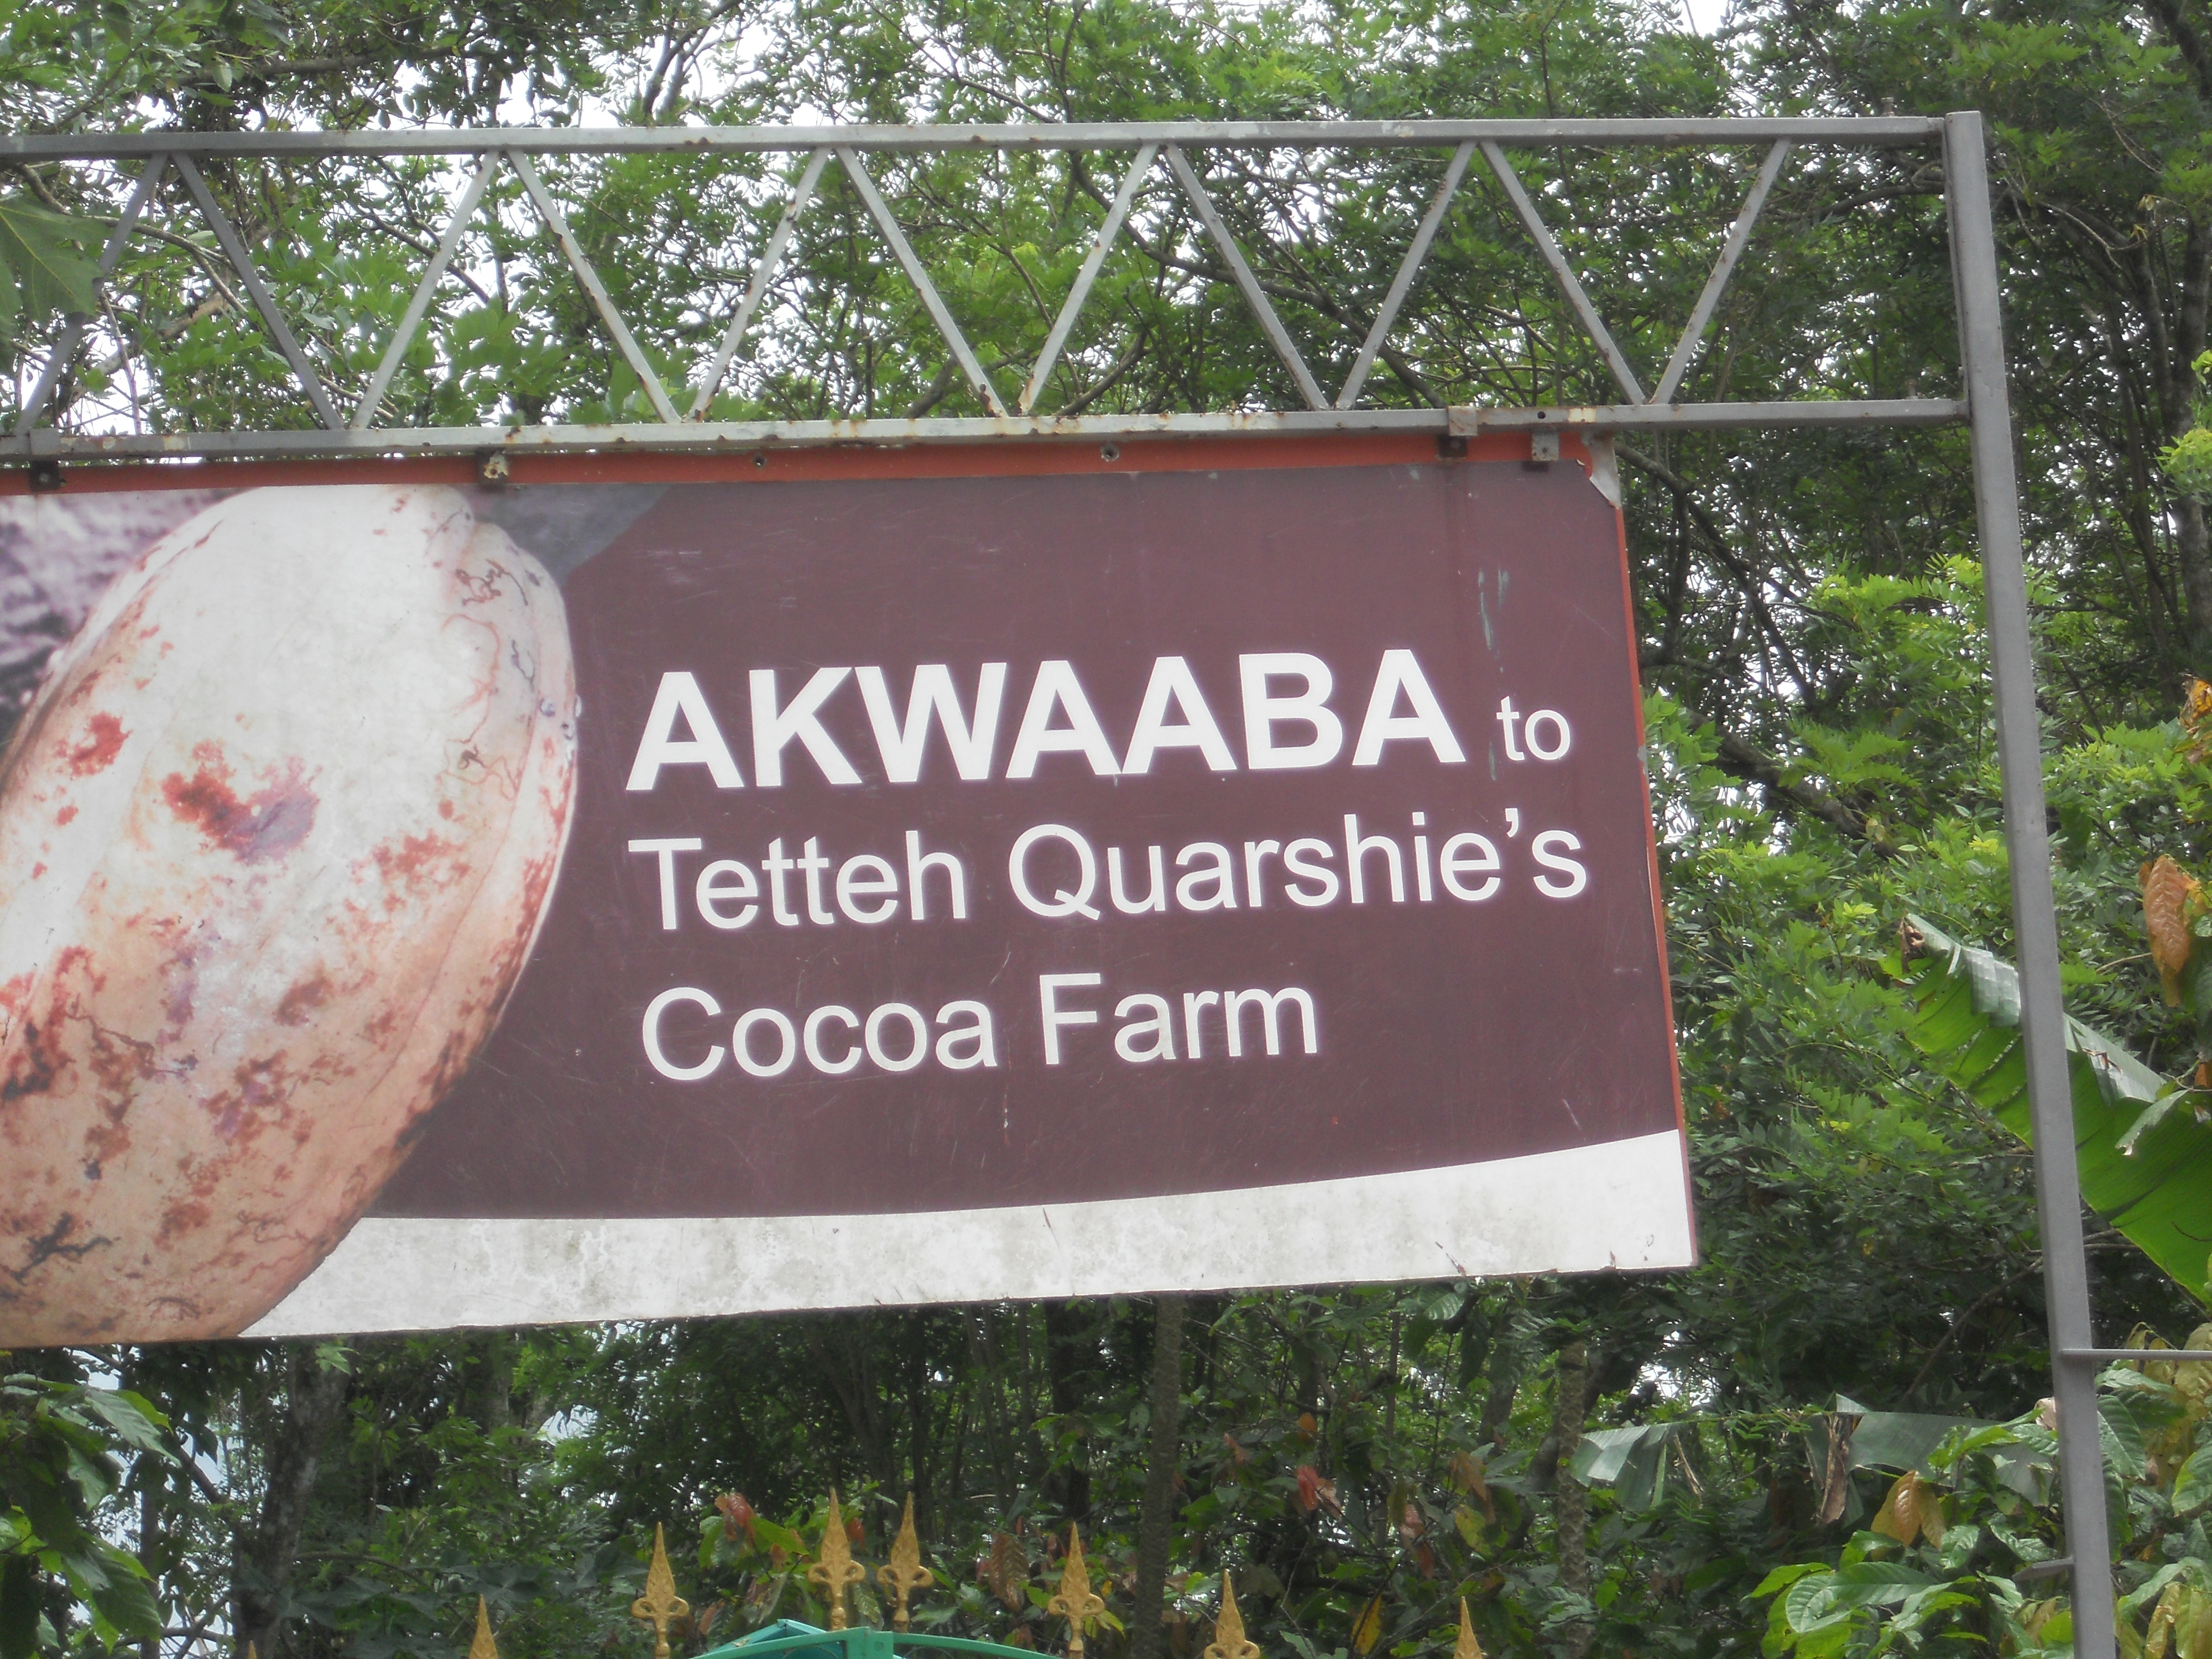 Elmina Heritage Bay, Tetteh Quarshie cocoa farms and Kintampo waterfalls undergoing upgrades 